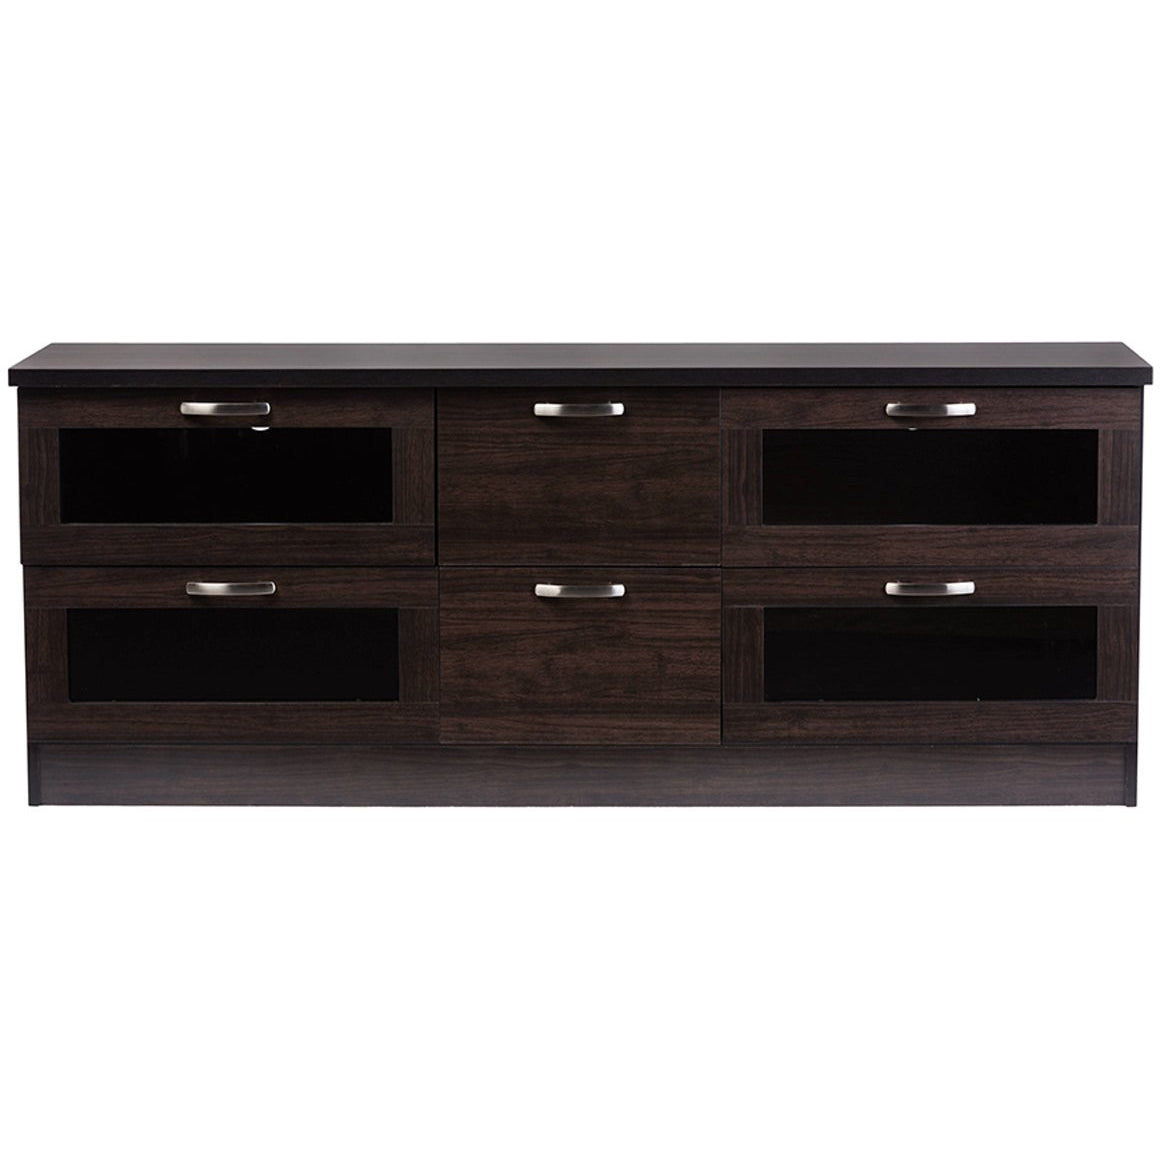 Baxton Studio Adelino 63 Inches Dark Brown Wood TV Cabinet with 4 Glass Doors and 2 Drawers Baxton Studio-TV Stands-Minimal And Modern - 1